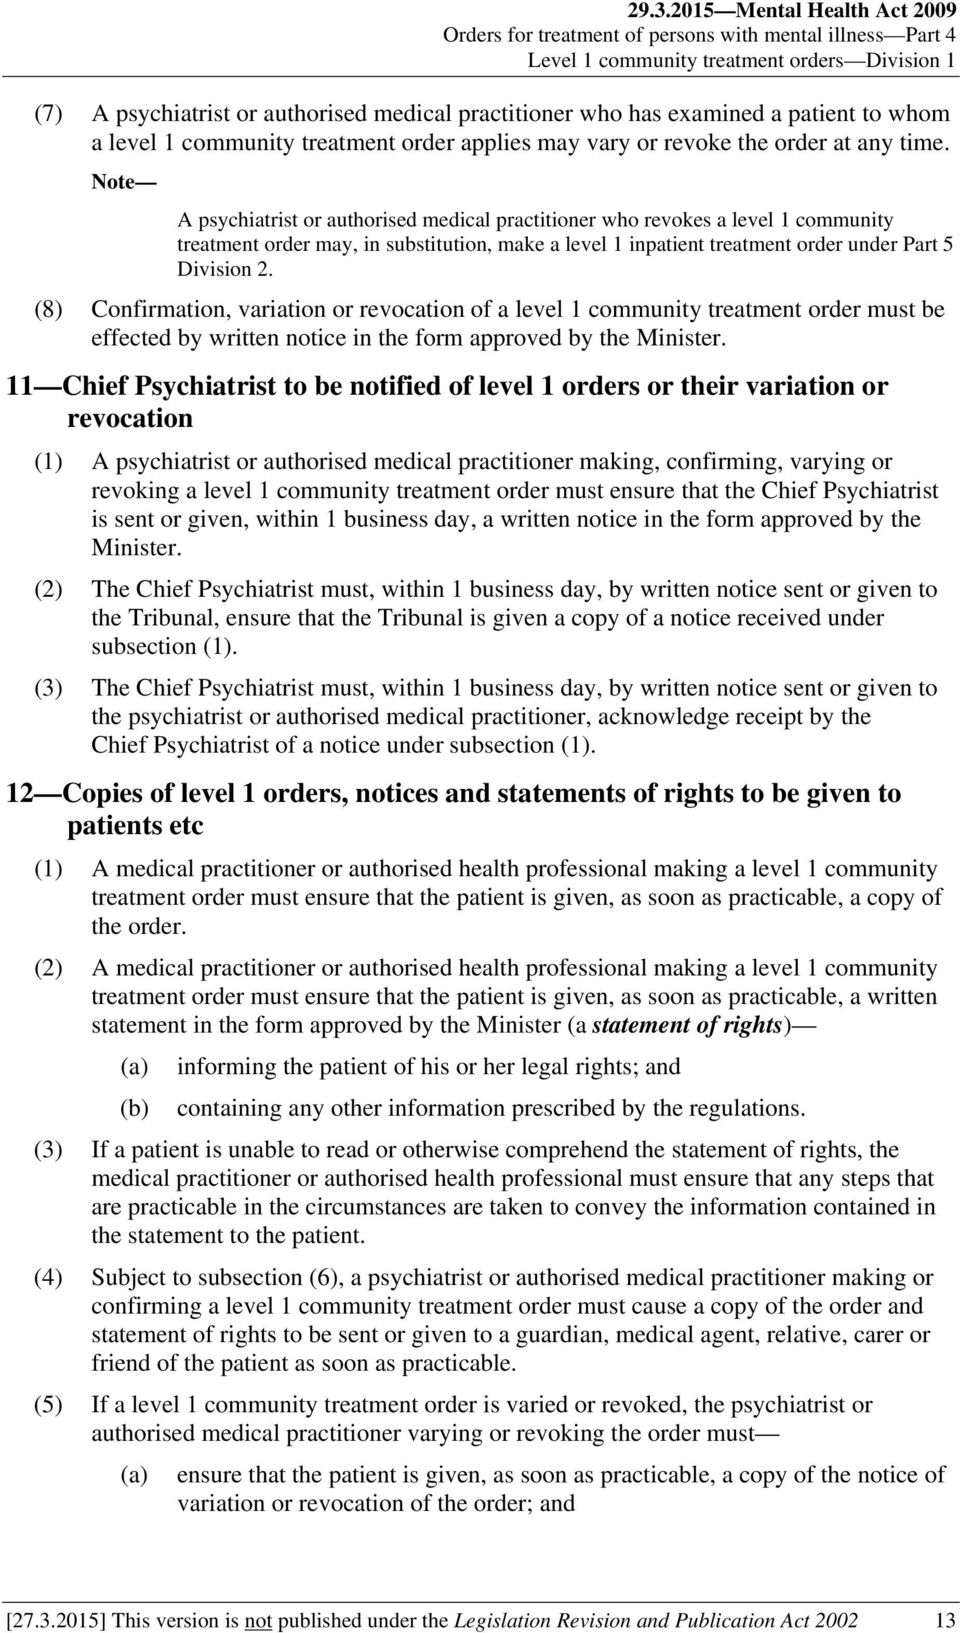 Note A psychiatrist or authorised medical practitioner who revokes a level 1 community treatment order may, in substitution, make a level 1 inpatient treatment order under Part 5 Division 2.